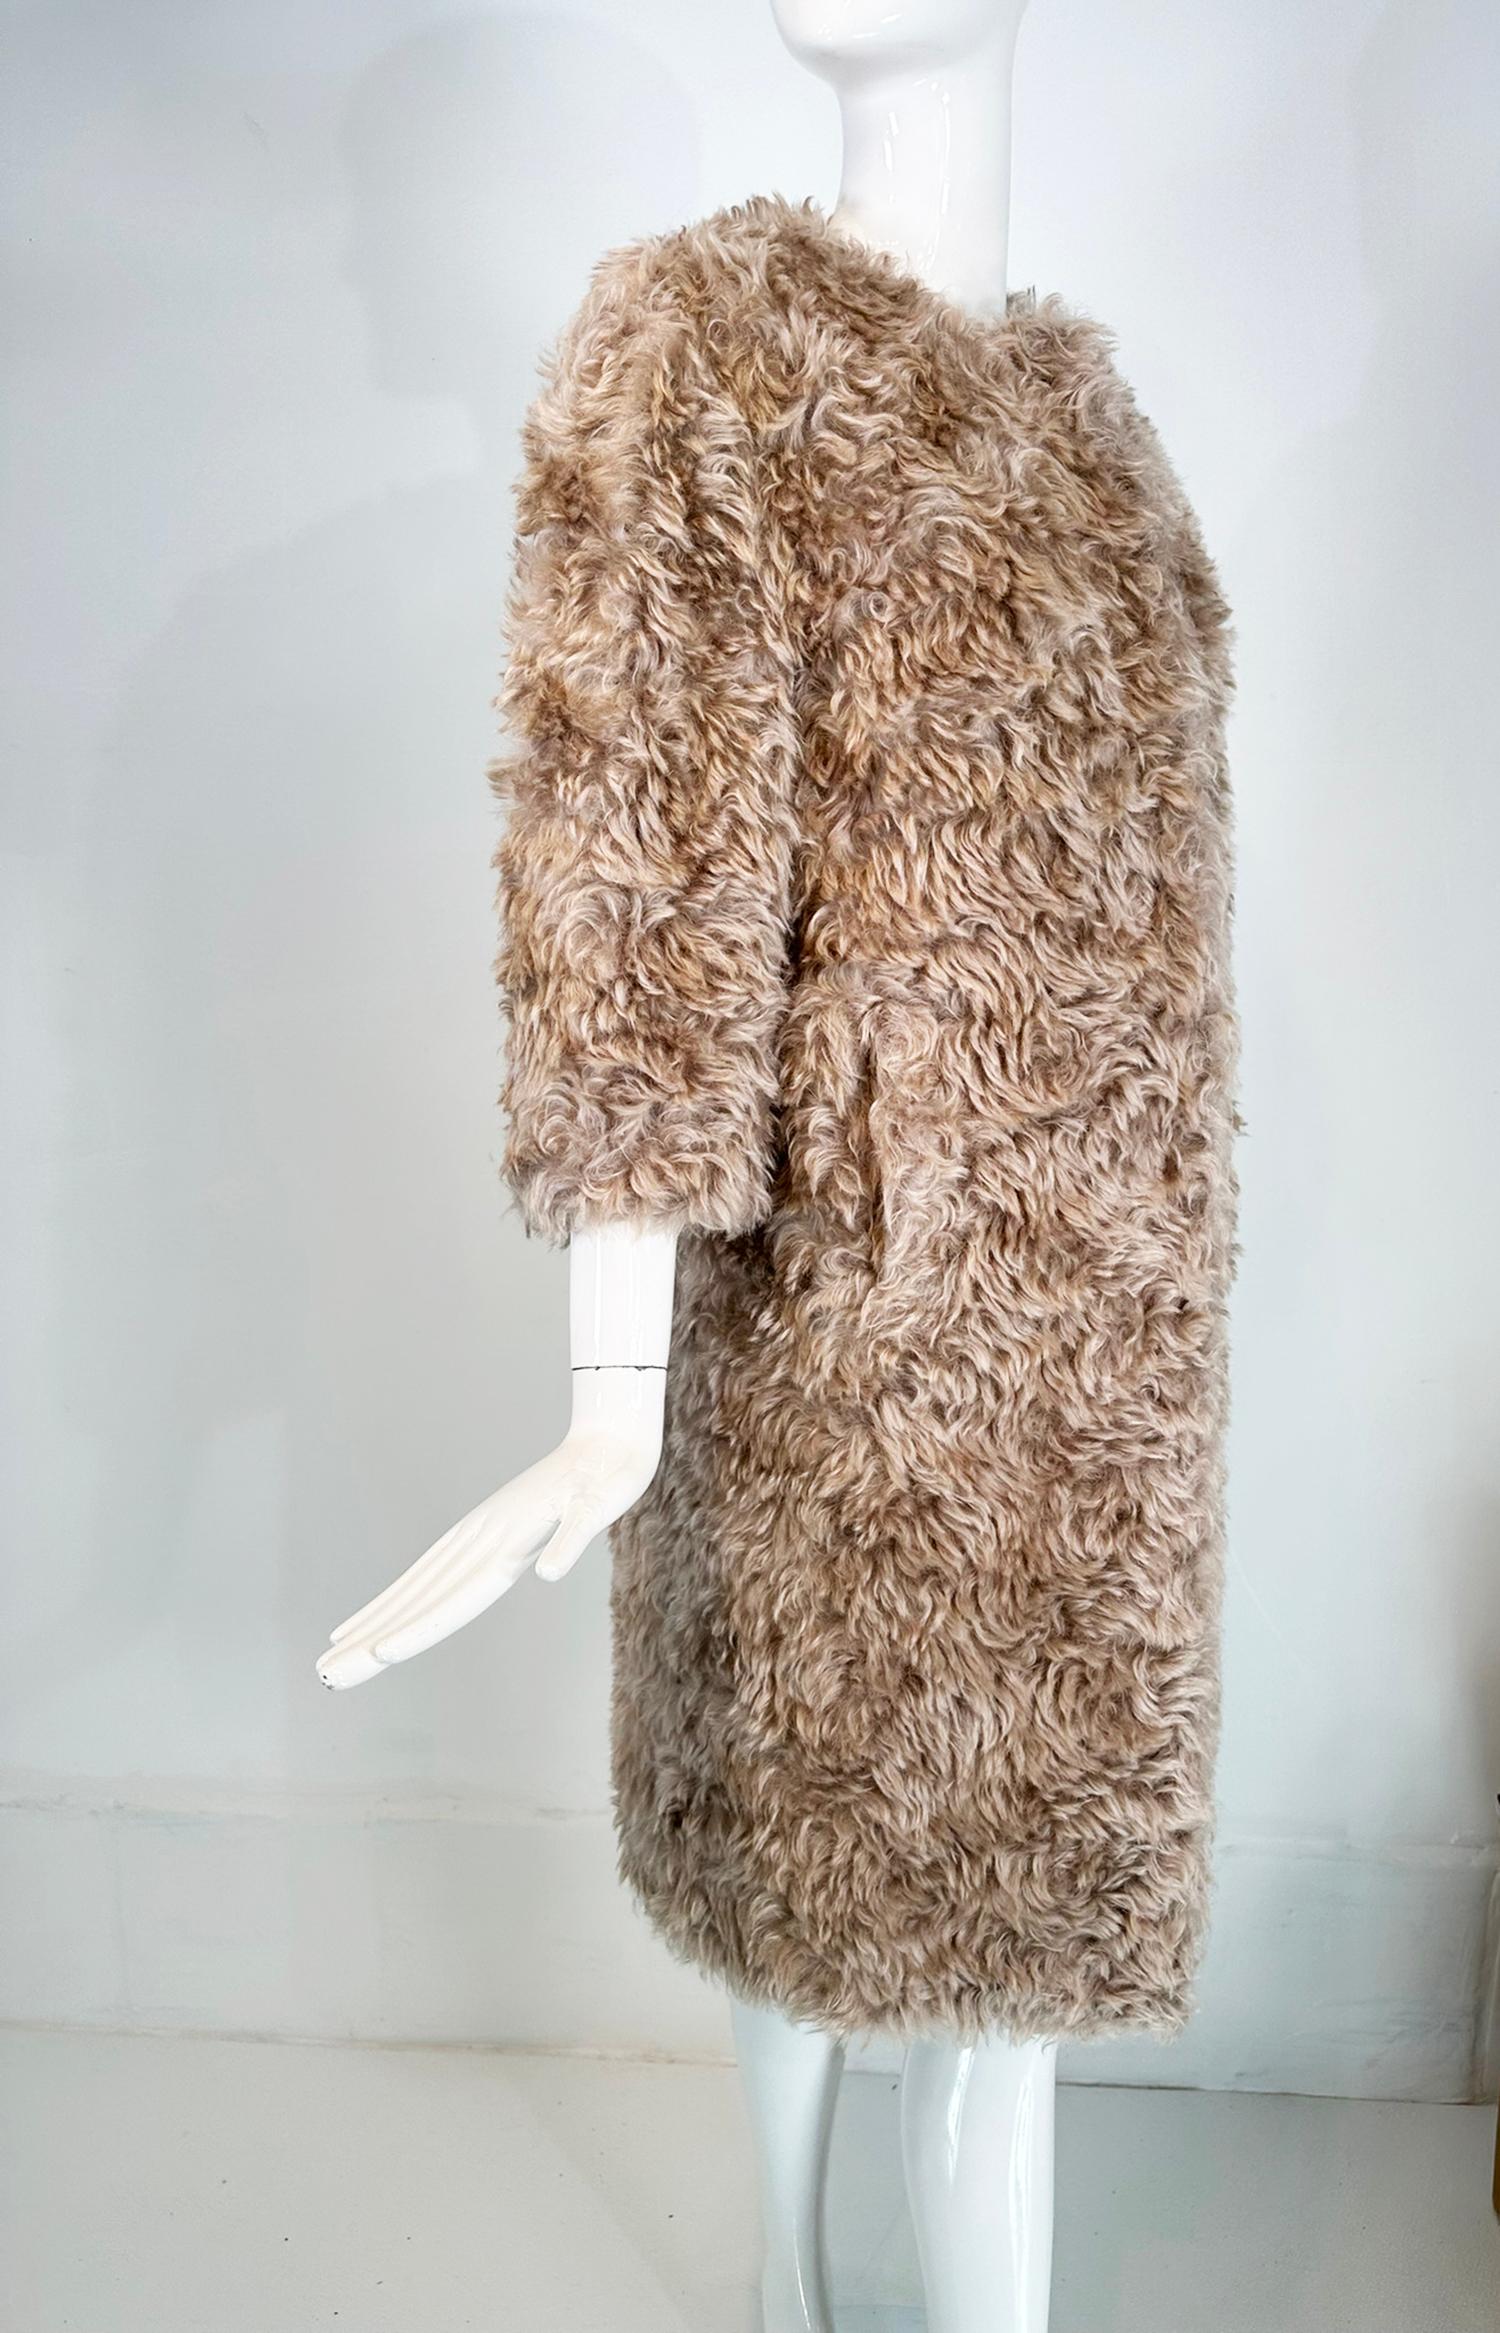 Prada Champagne Mohair Jewel Neck Big Snaps Faux Fur Teddy Bear Coat 38 In Good Condition For Sale In West Palm Beach, FL